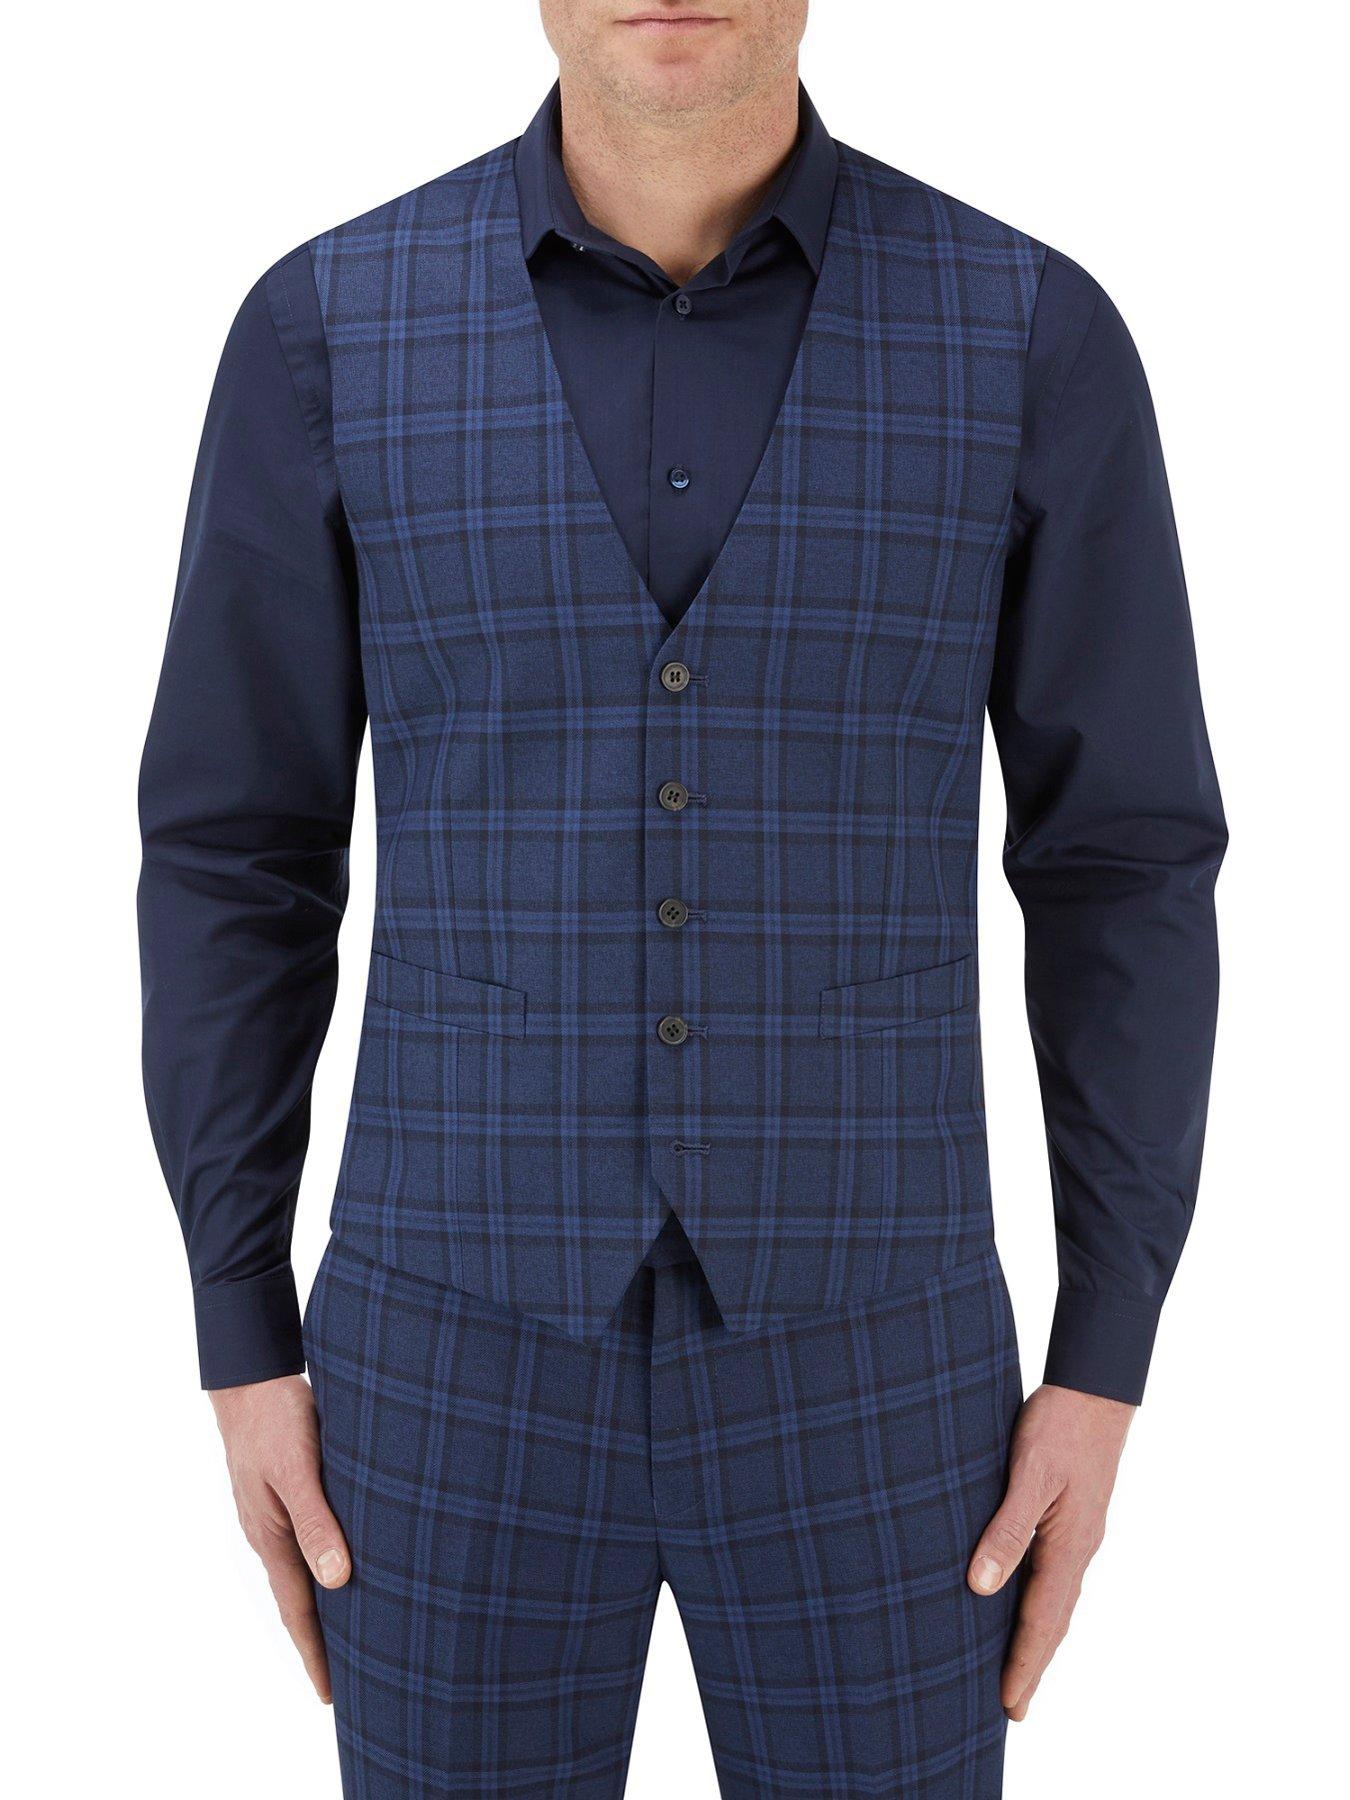  Angus 5 Button Bold Check lyfcycle Waistcoat - Navy Check